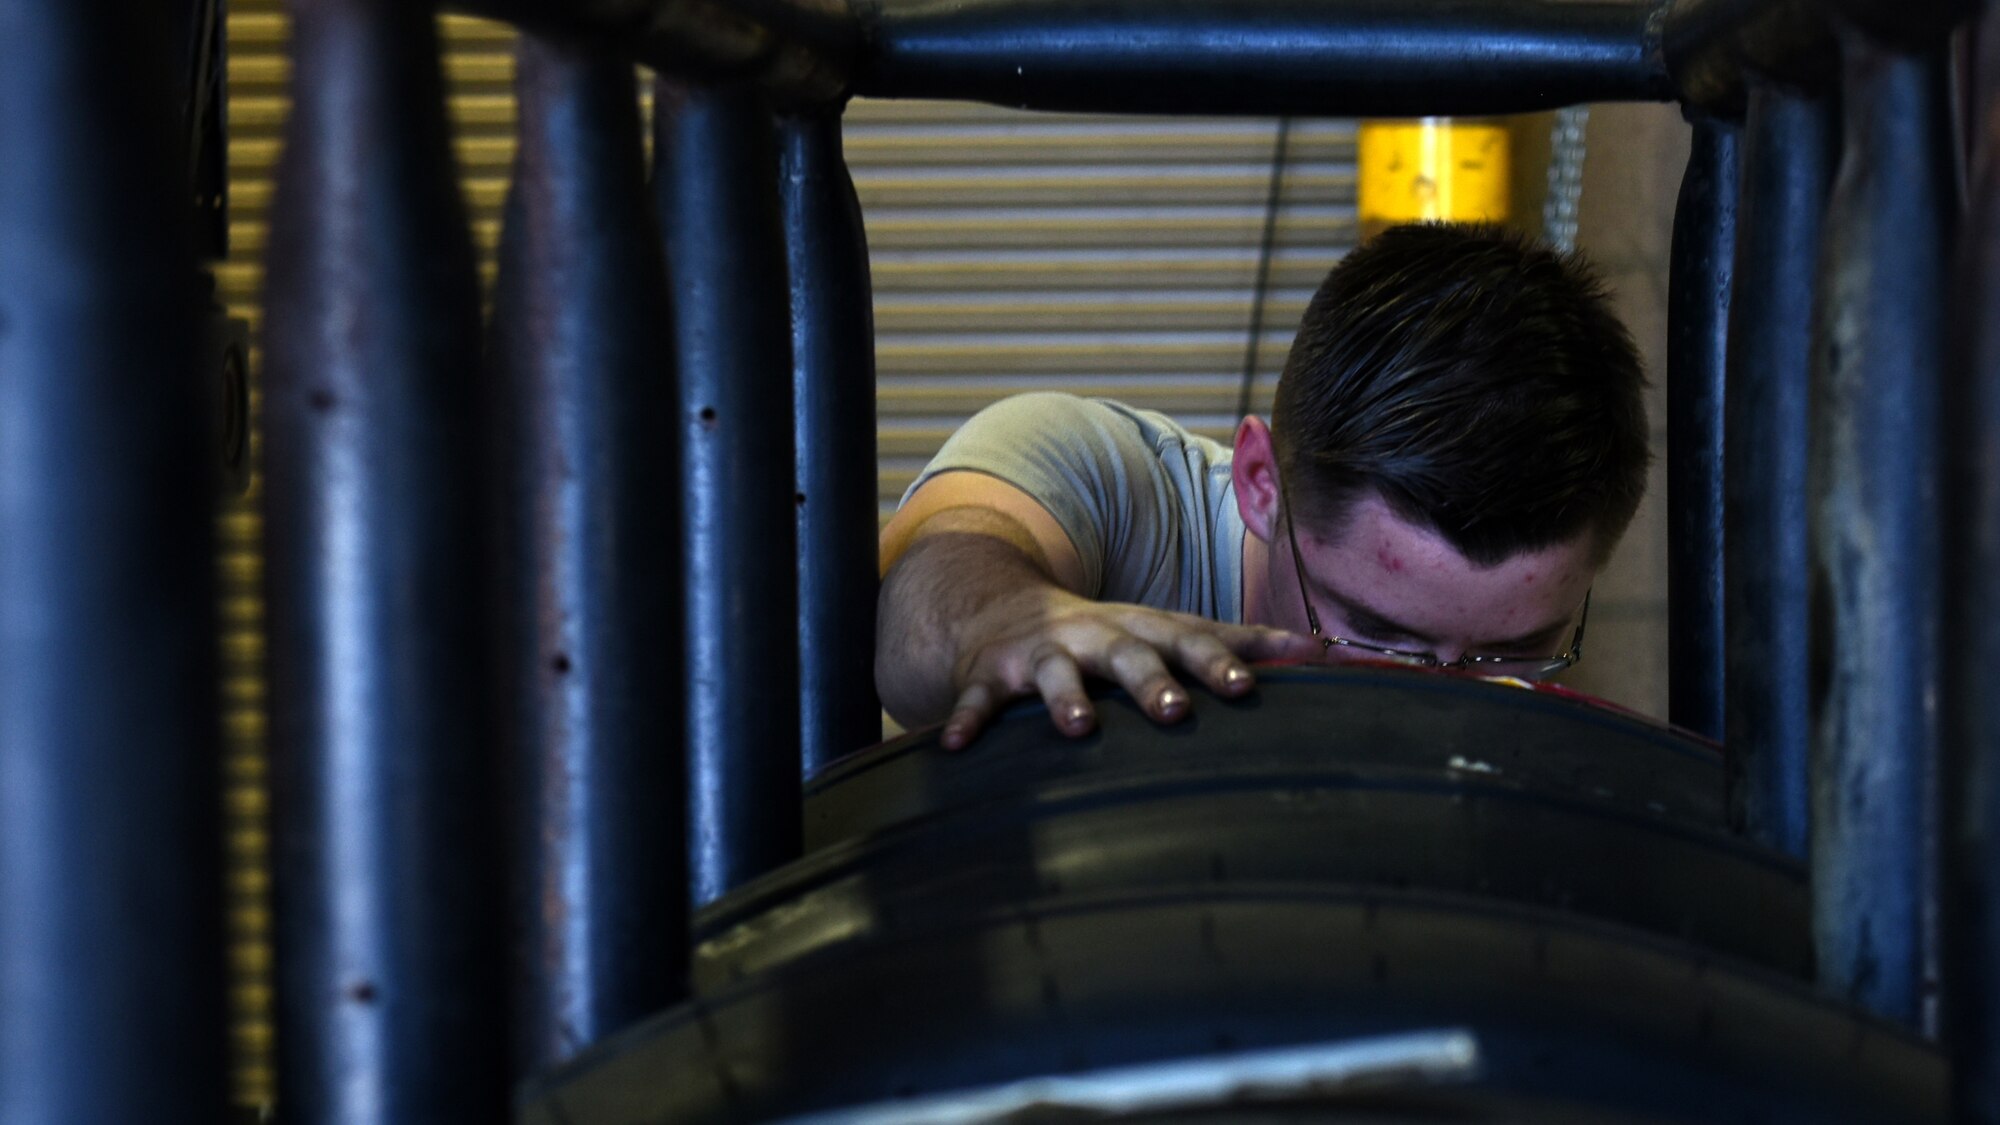 A photo of an Airman inspecting a tire